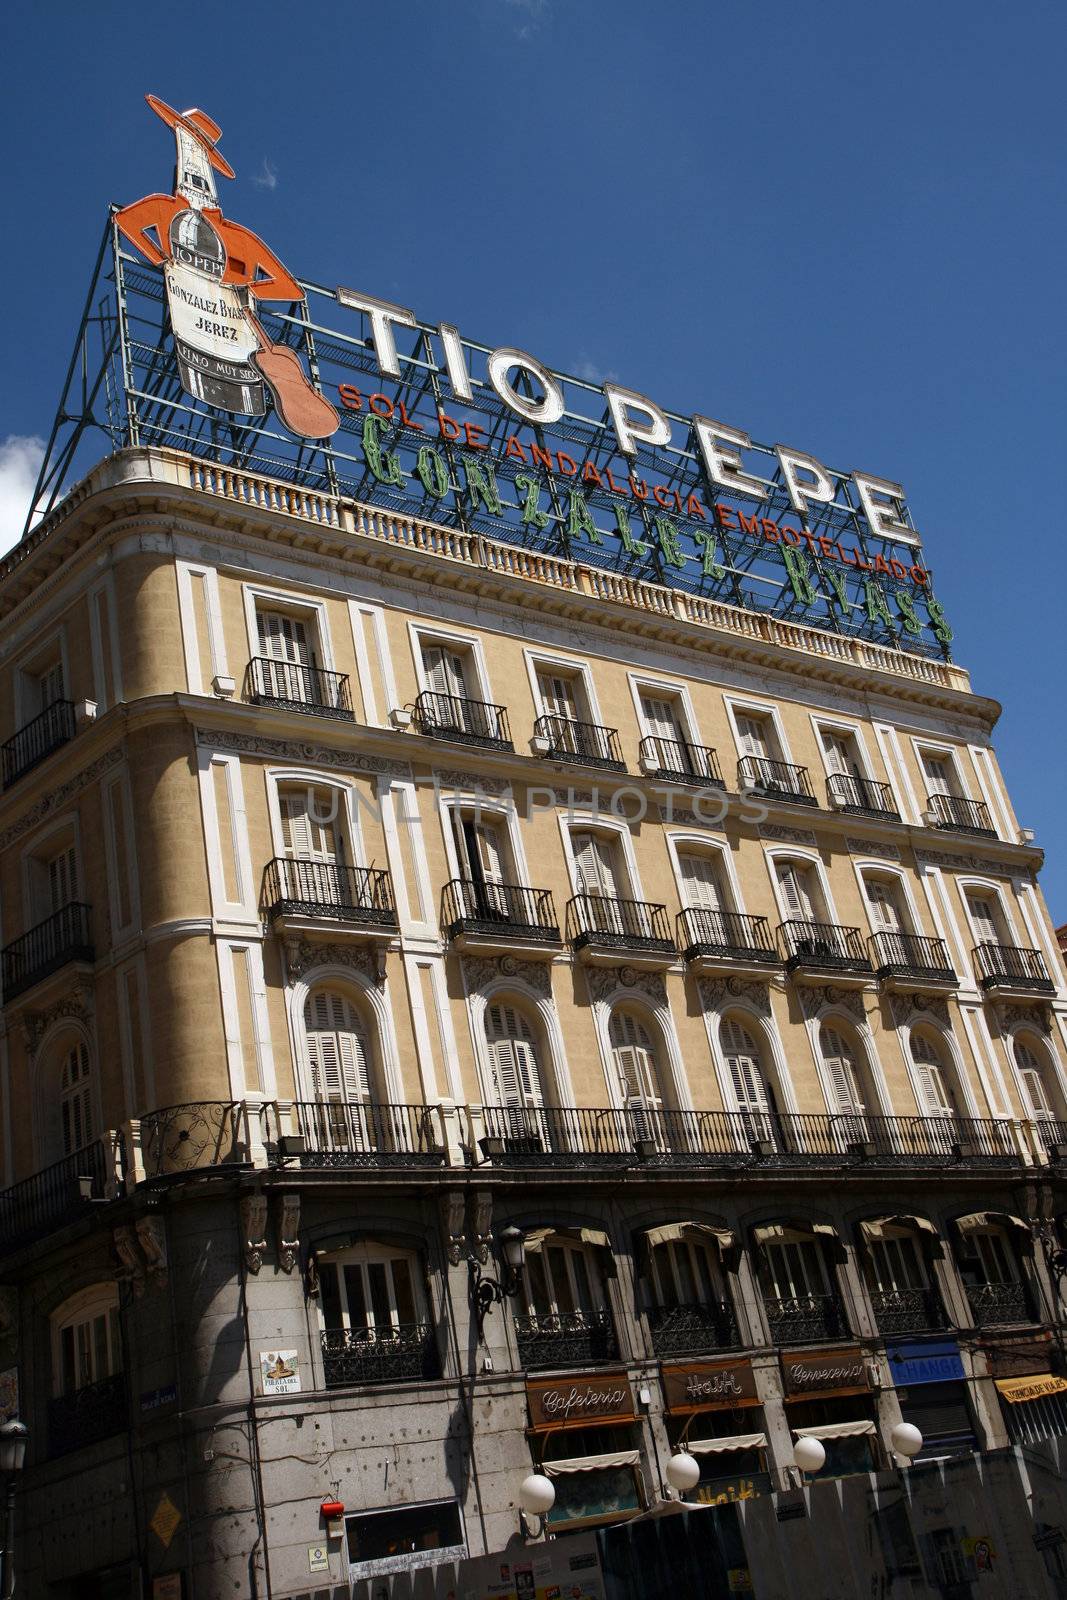 The Tio Pepe sign in downtown Madrid's Puerta del Sol. 